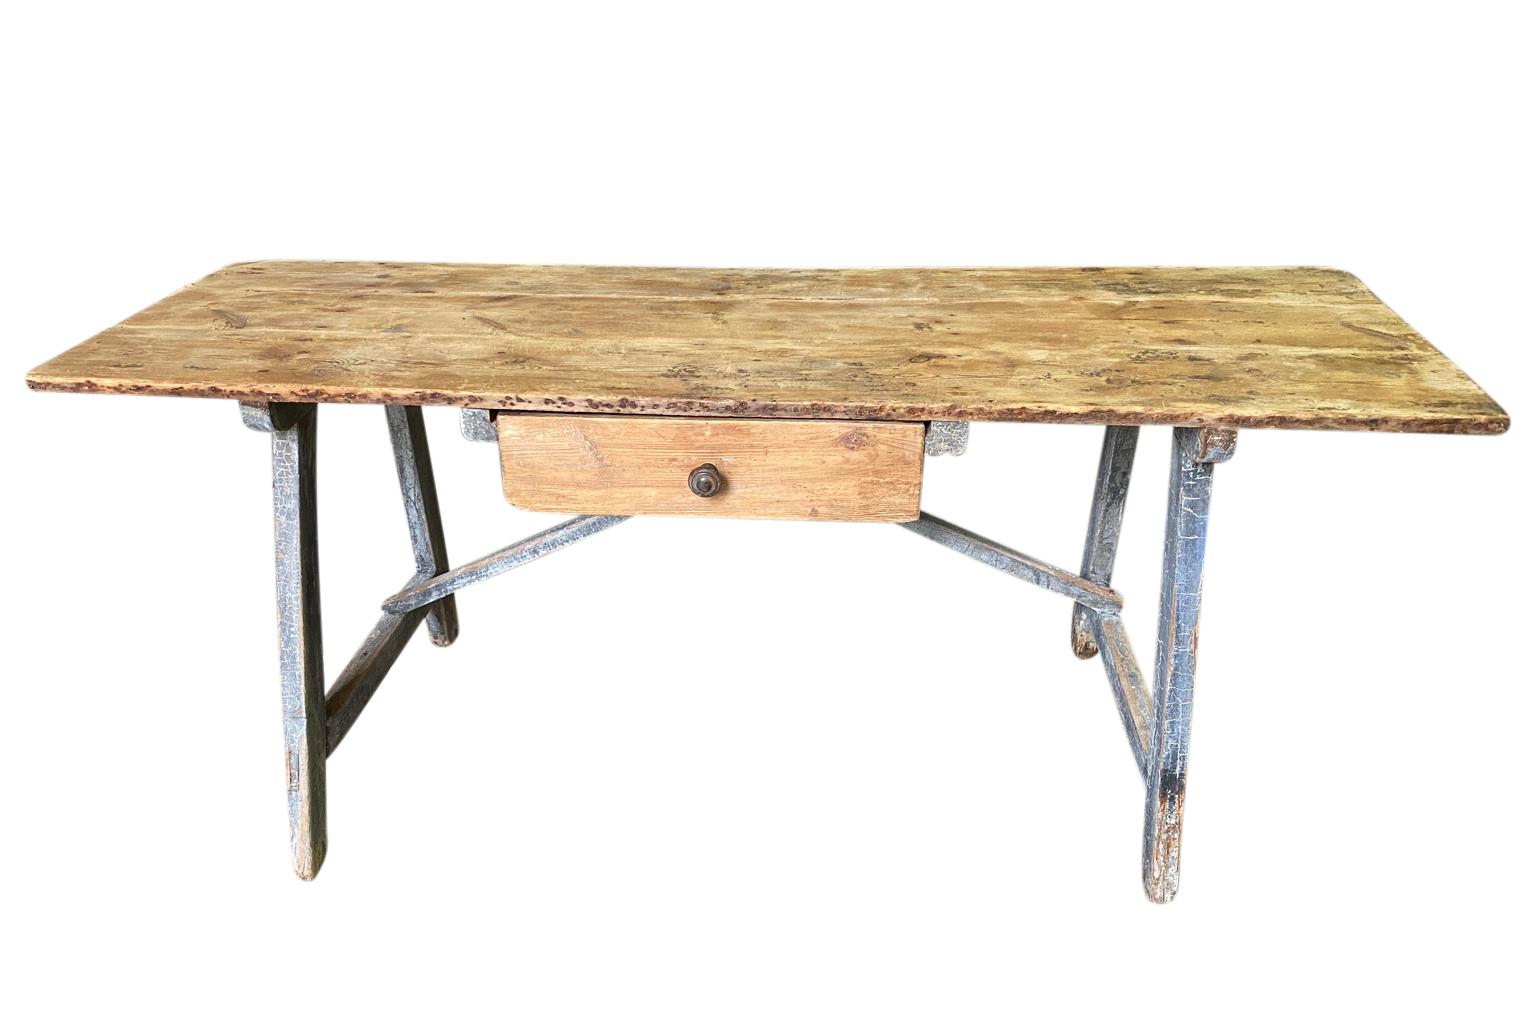 A charming later 19th century Writing Table - Desk from the Catalan region of Spain.  Soundly constructed from natural and painted pine with a single drawer, 